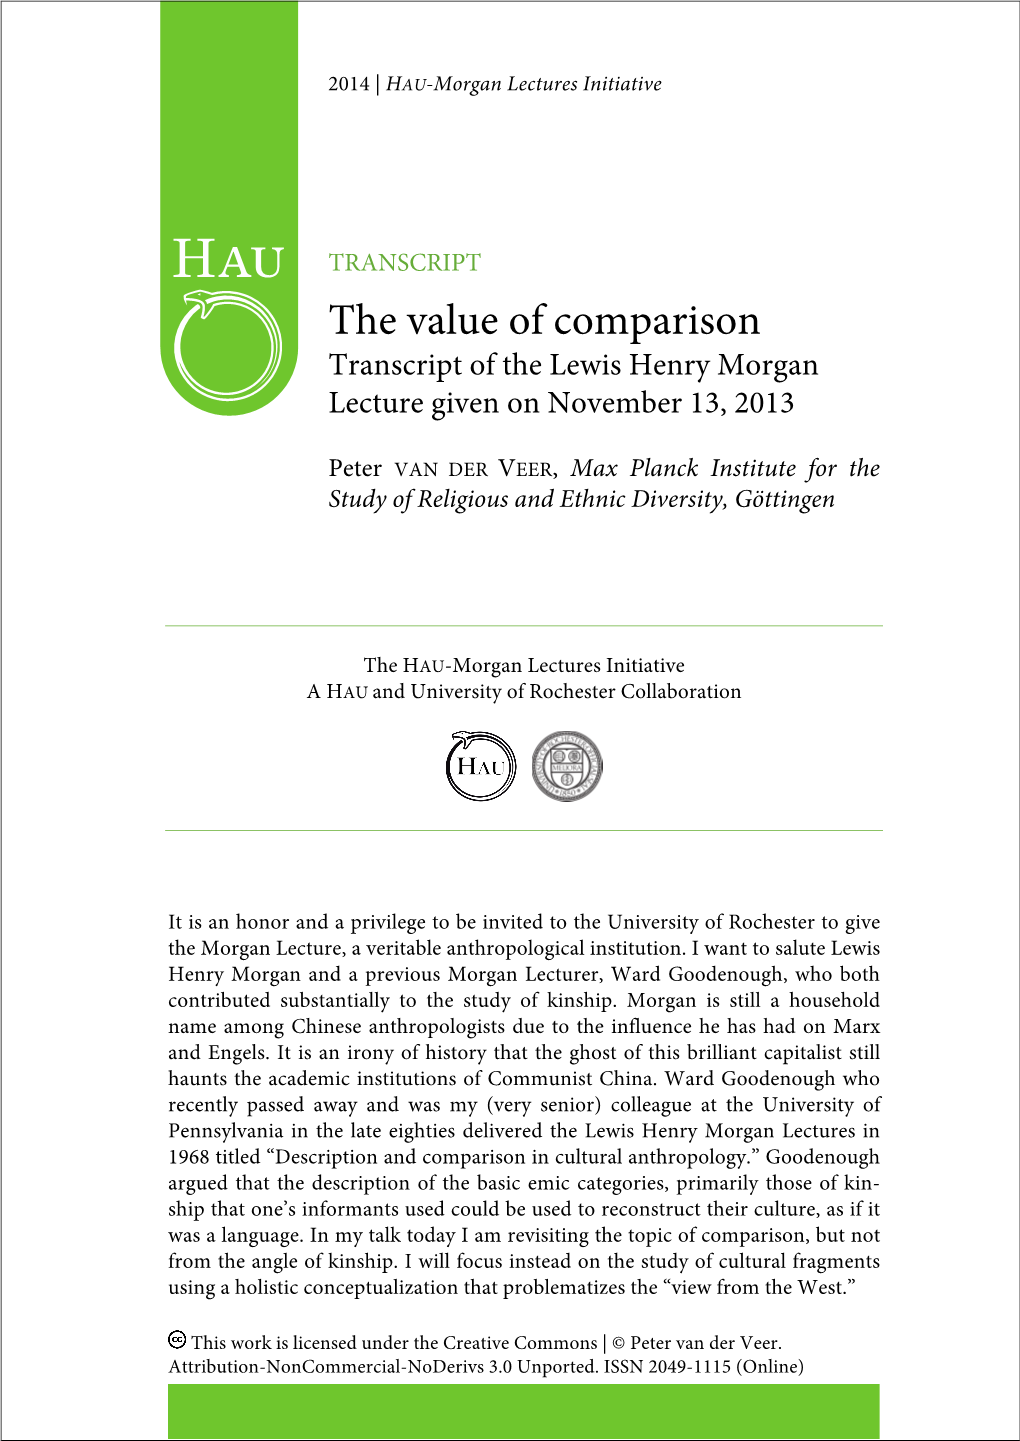 The Value of Comparison Transcript of the Lewis Henry Morgan Lecture Given on November 13, 2013